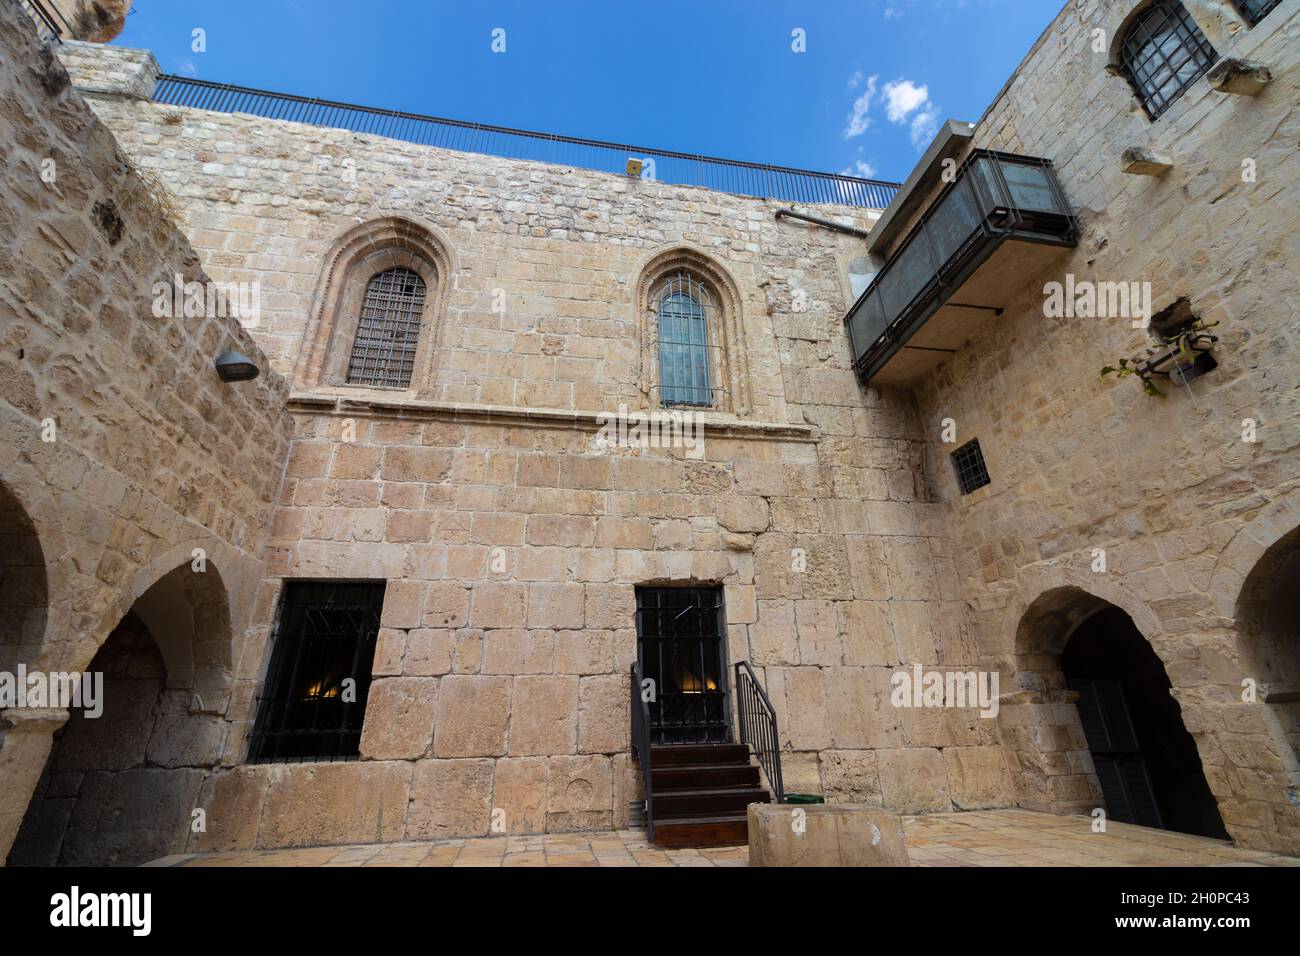 jerusalem-israel. 13-10-2021. The famous structure of the tomb of King David on Mount Zion in the Jewish Quarter of Jerusalem Stock Photo